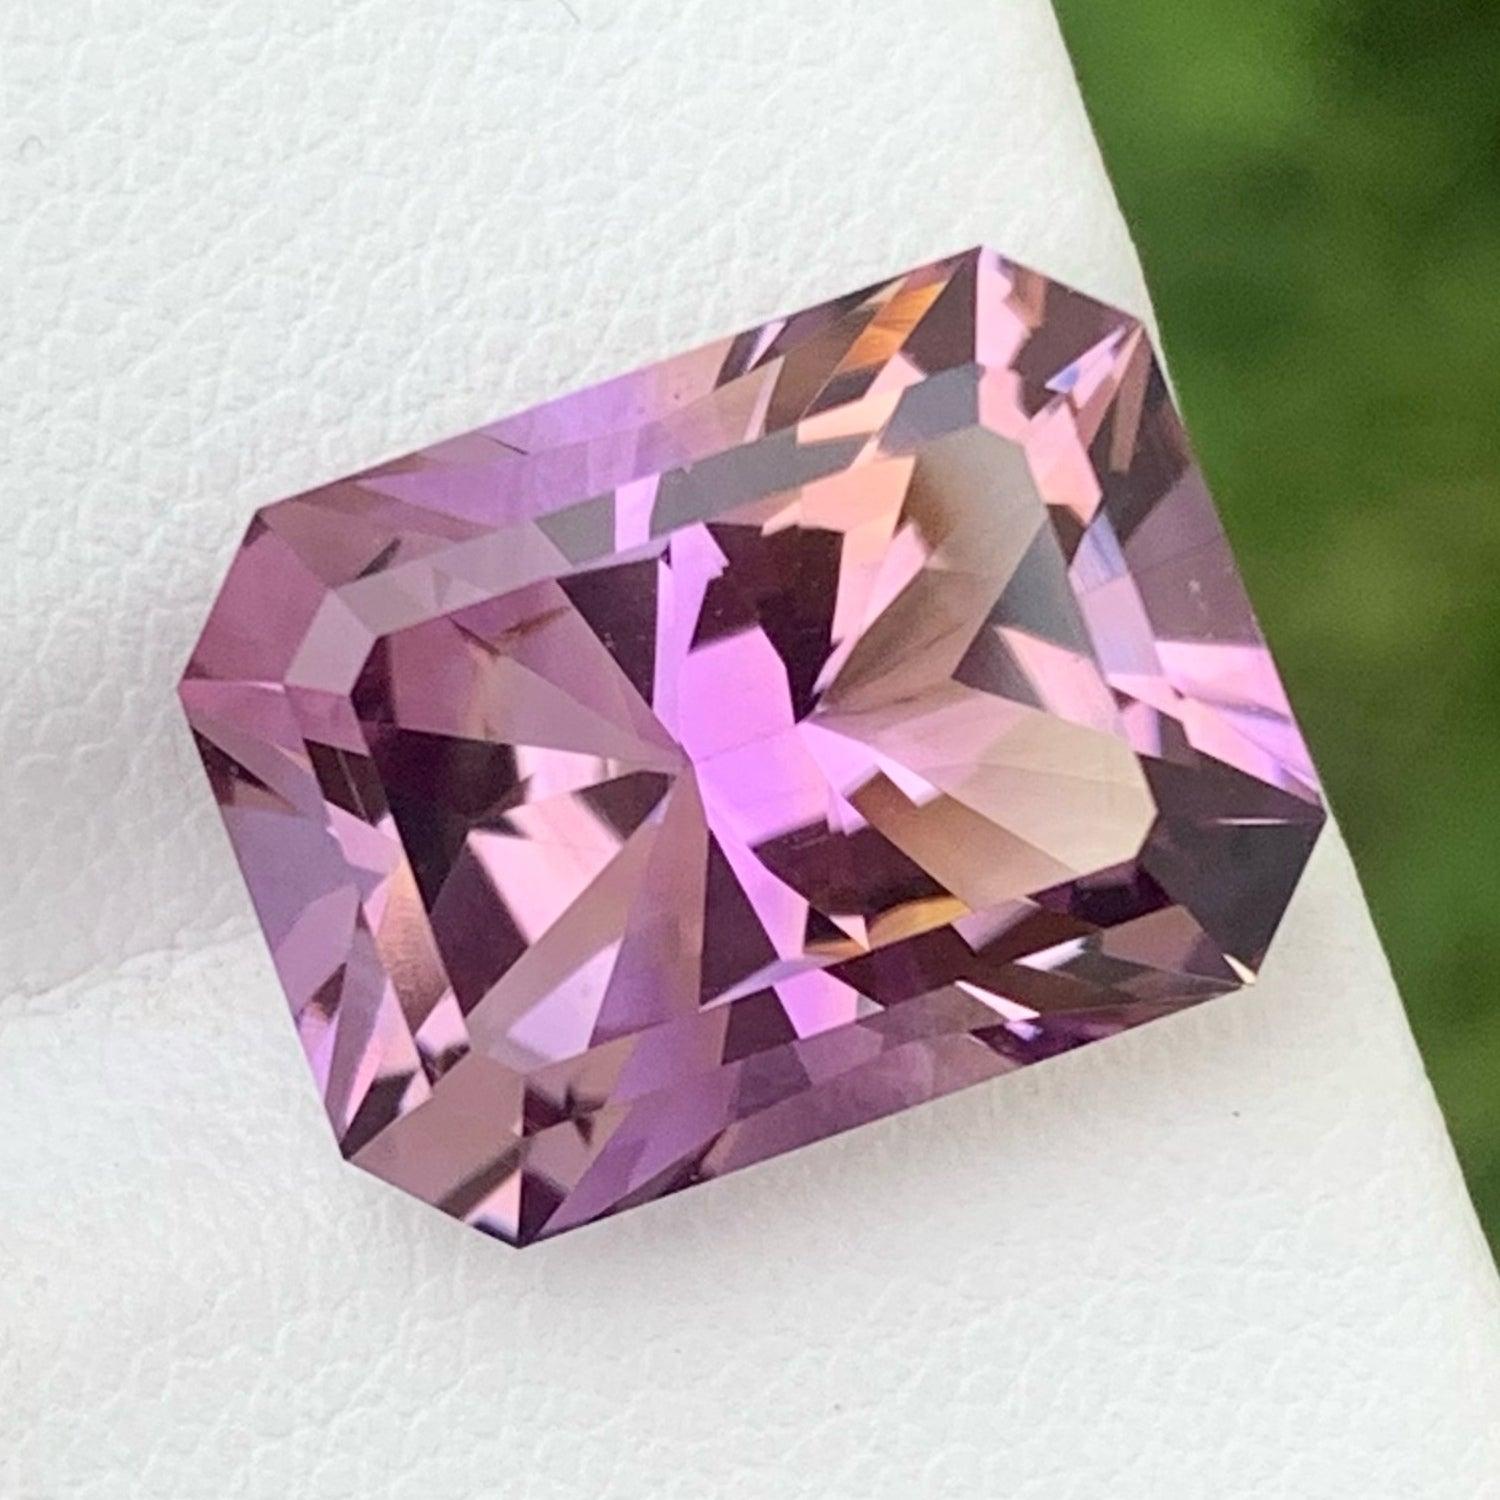 Precision Cut Bolivia Ametrine Gemstone, Available For Sale Natural High Quality  Loupe Clean Clarity 9.75 Carats Loose Certified Ametrine Gemstone From Bolivia.

Product Information:
GEMSTONE: TYPE	Precision Cut Bolivia Ametrine Gemstone
WEIGHT: